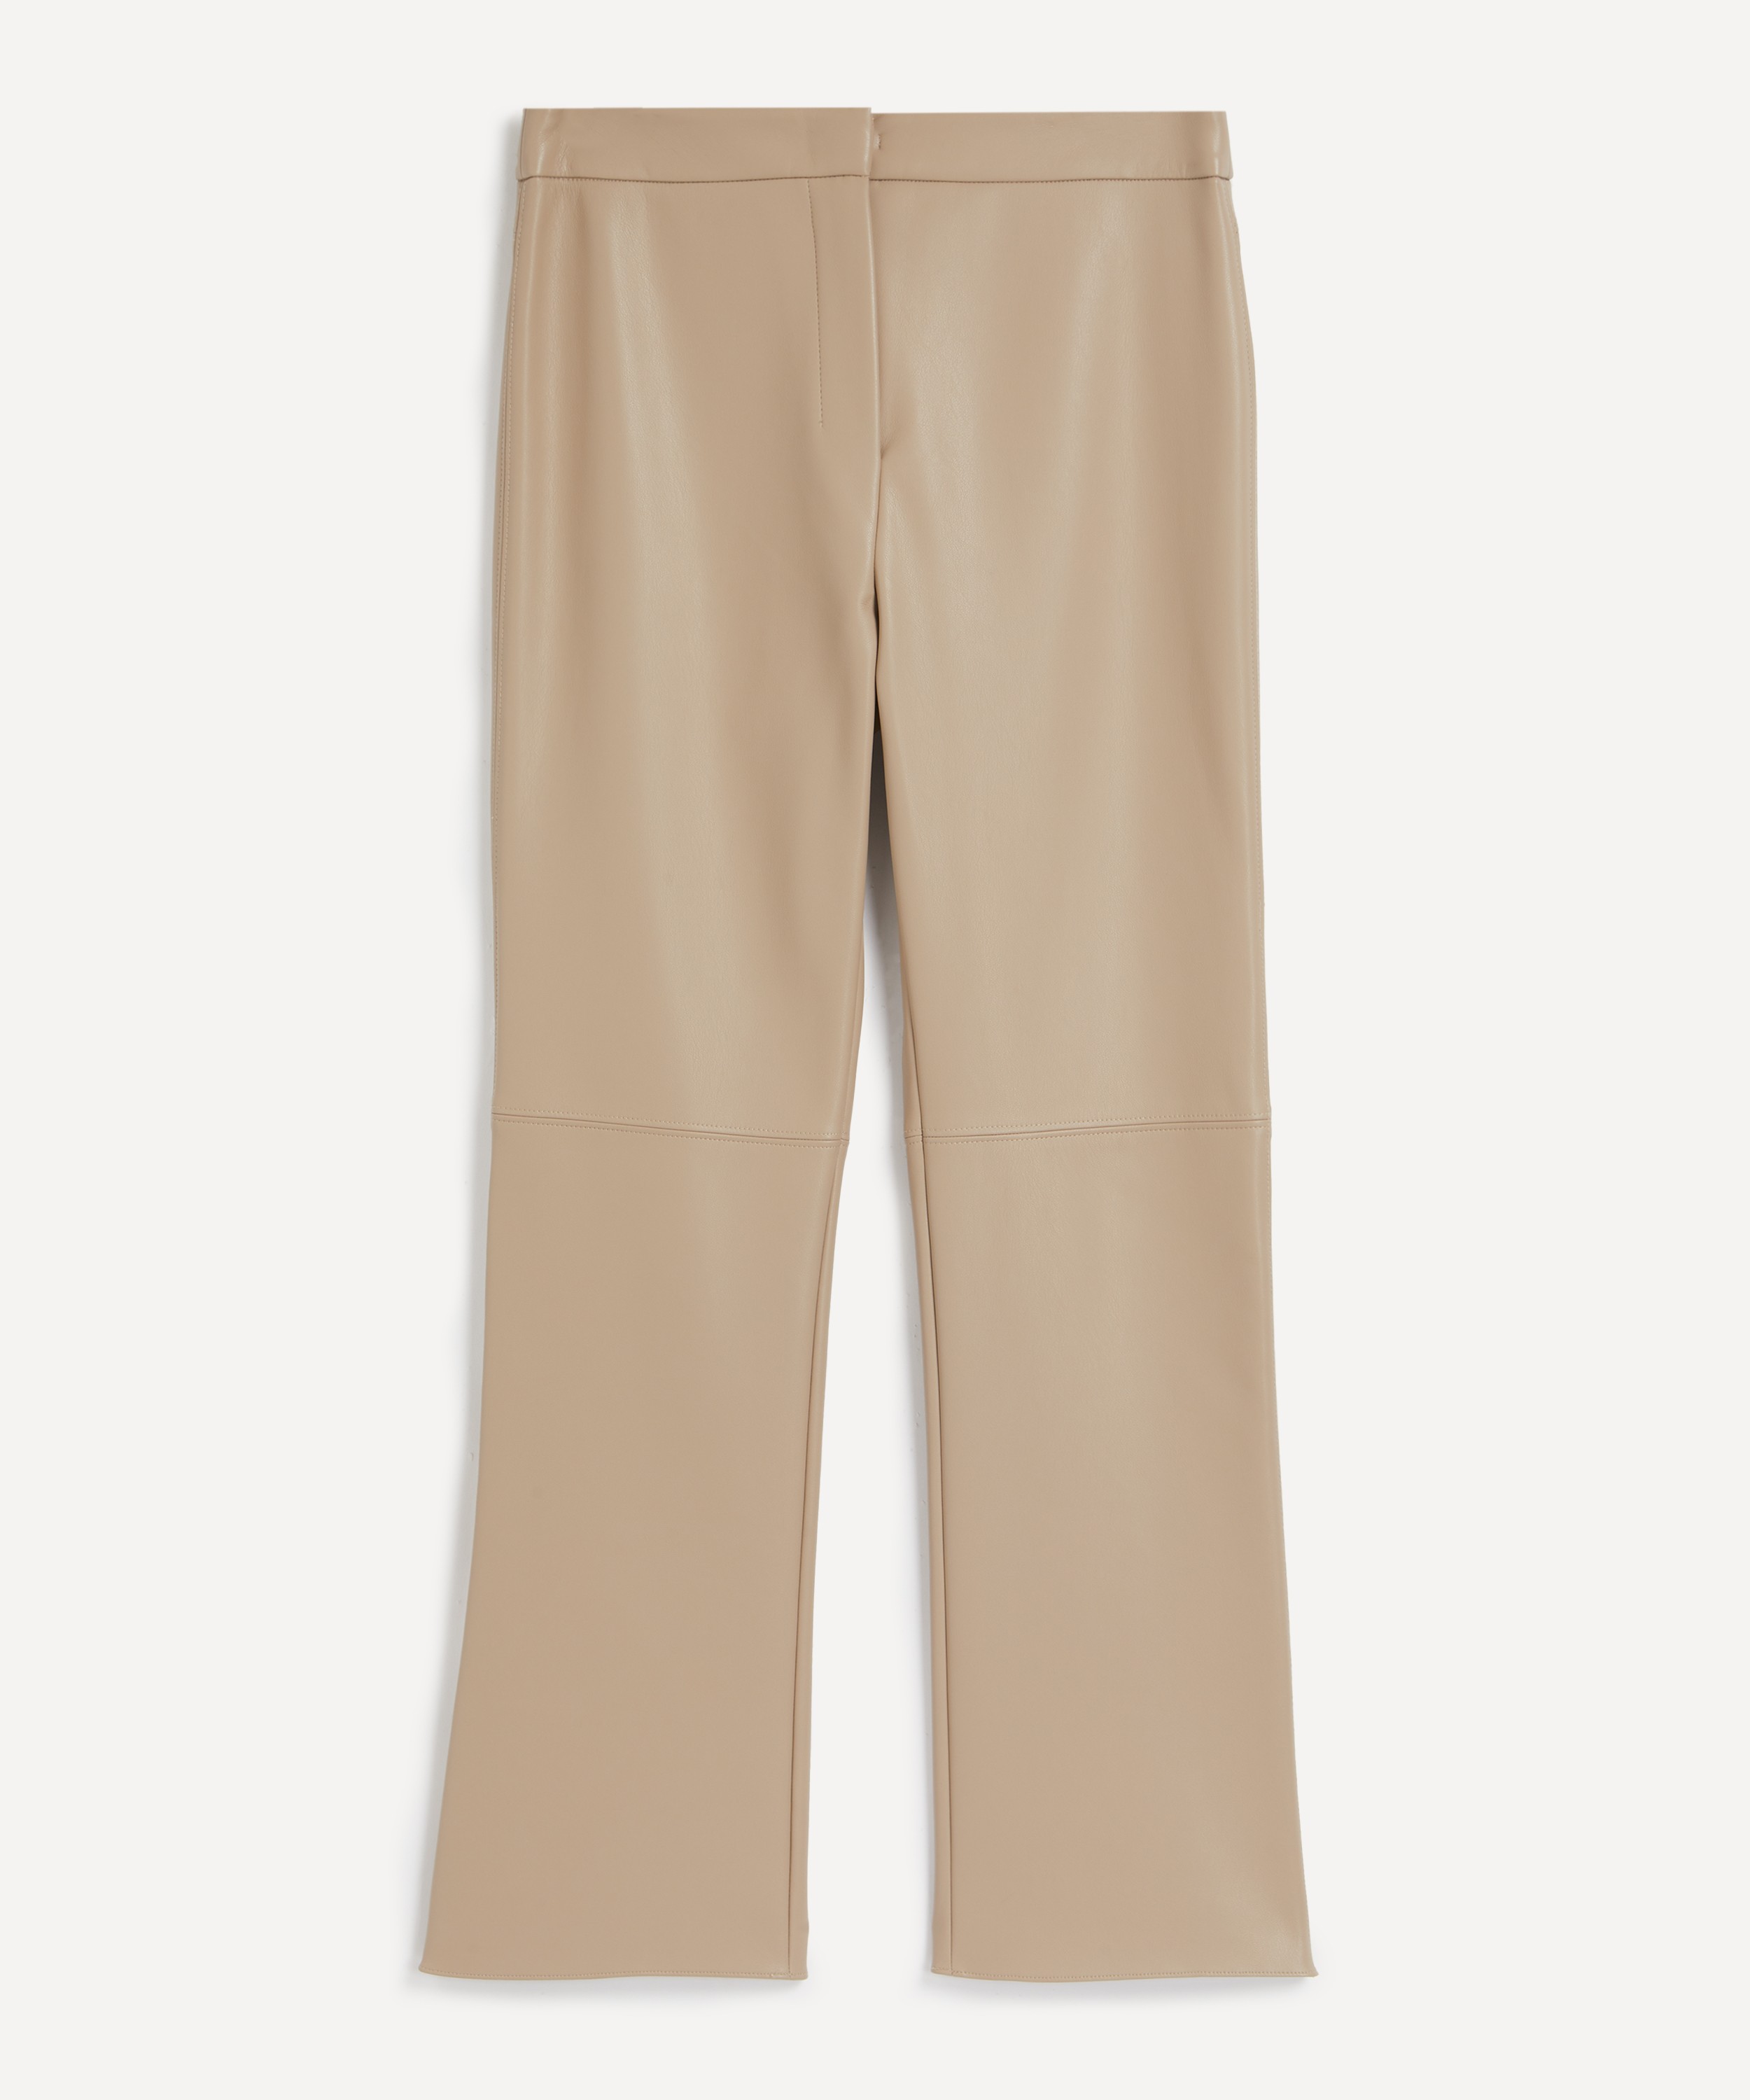 S Max Mara Sublime Coated-Look Jersey Trousers